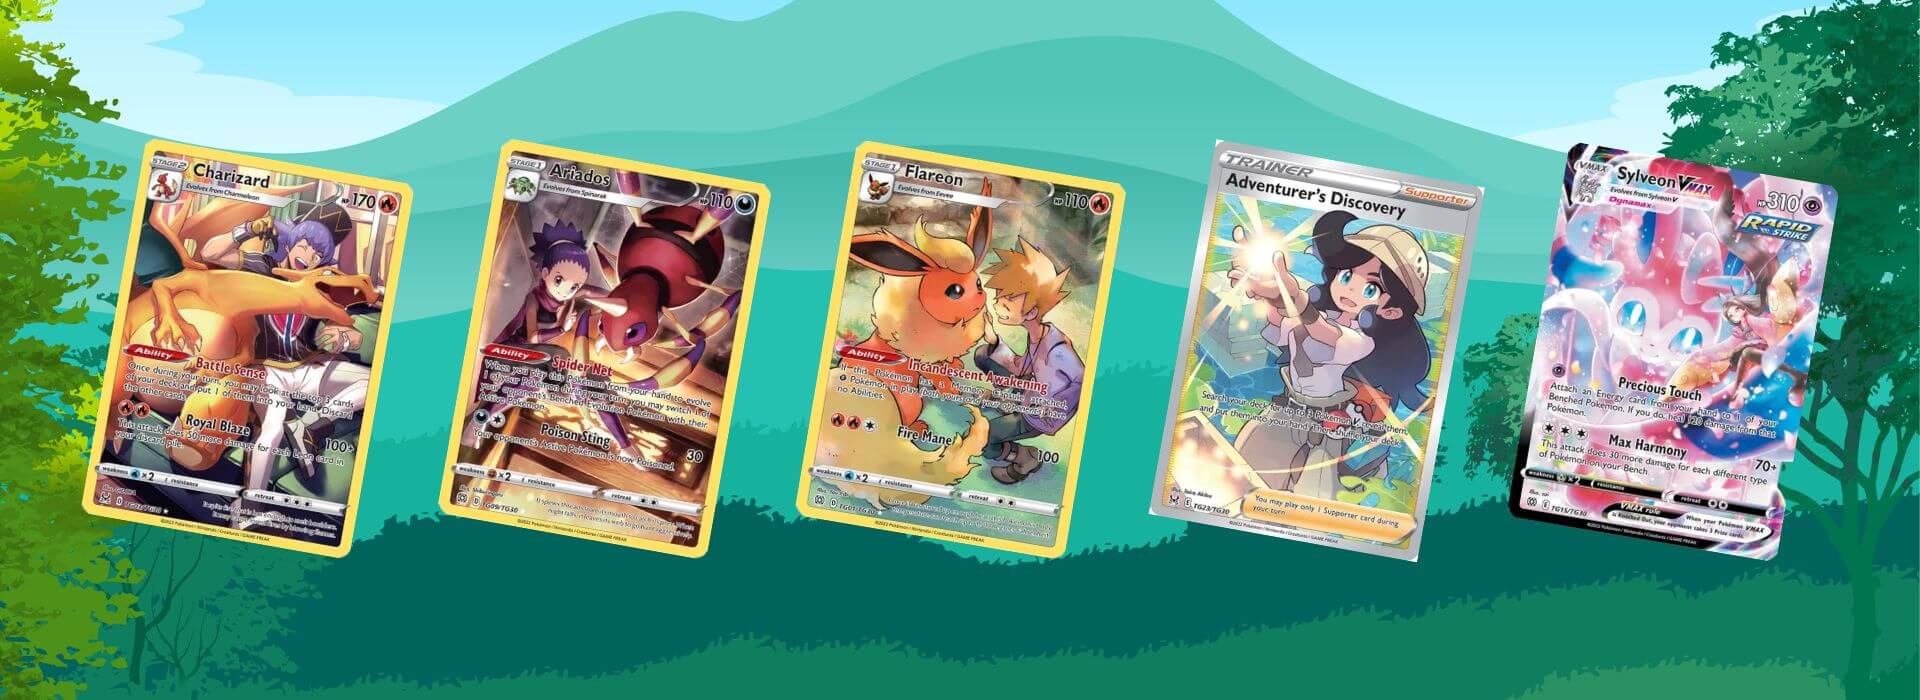 Pokémon Trainer Gallery | Top 10 Trainer Gallery Cards in Pokemon TCG